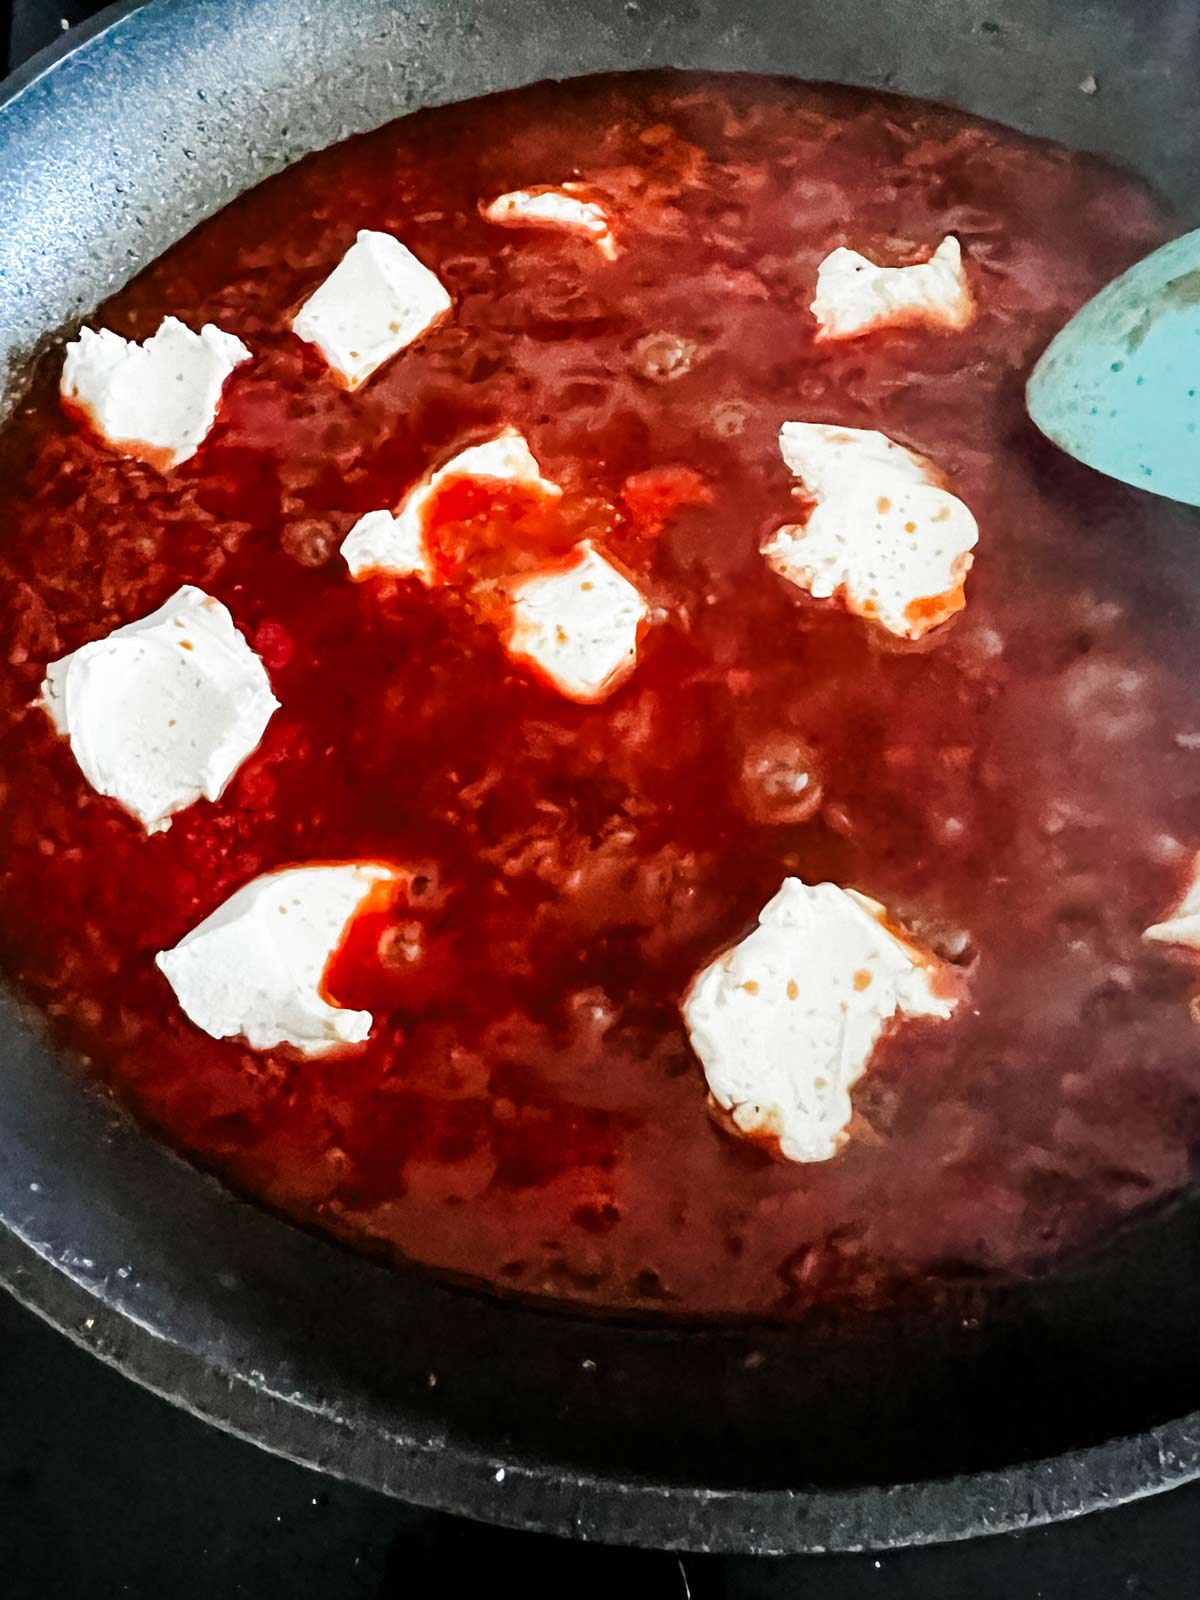  tomato sauce, broth, cream cheese in a skillet.